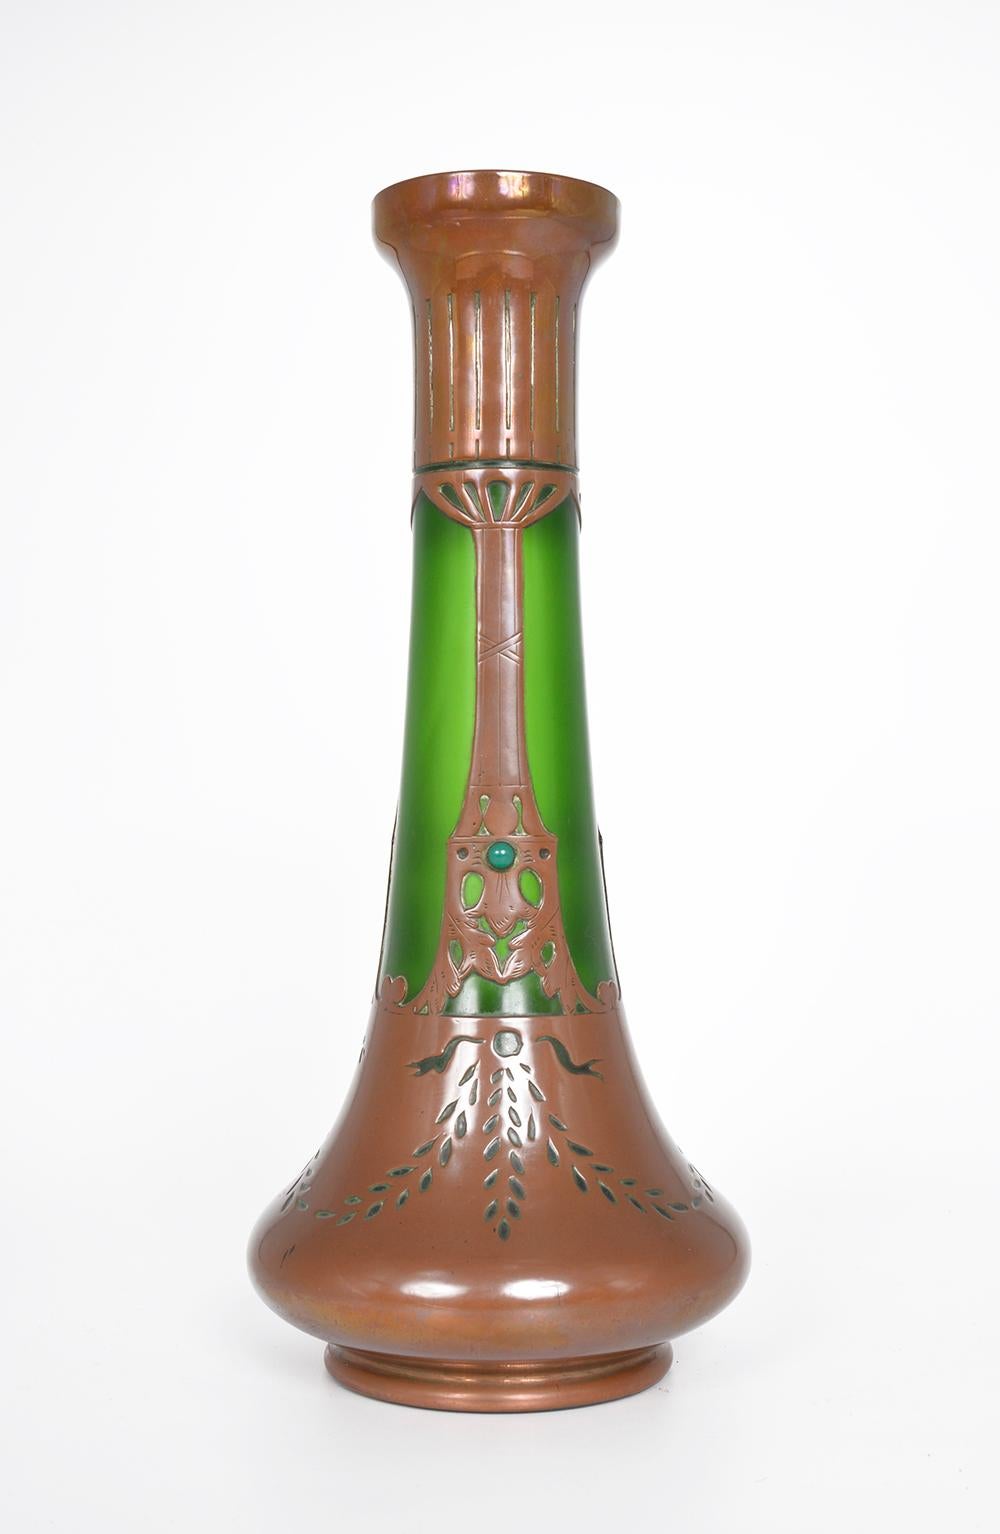 This is a large hand blown emerald green opaque glass vase with applied open work copper overlay decoration, which is likely to have been manufactured in Austria around the 1900s. Its stunning linear surface pattern reveals the artistic influence of